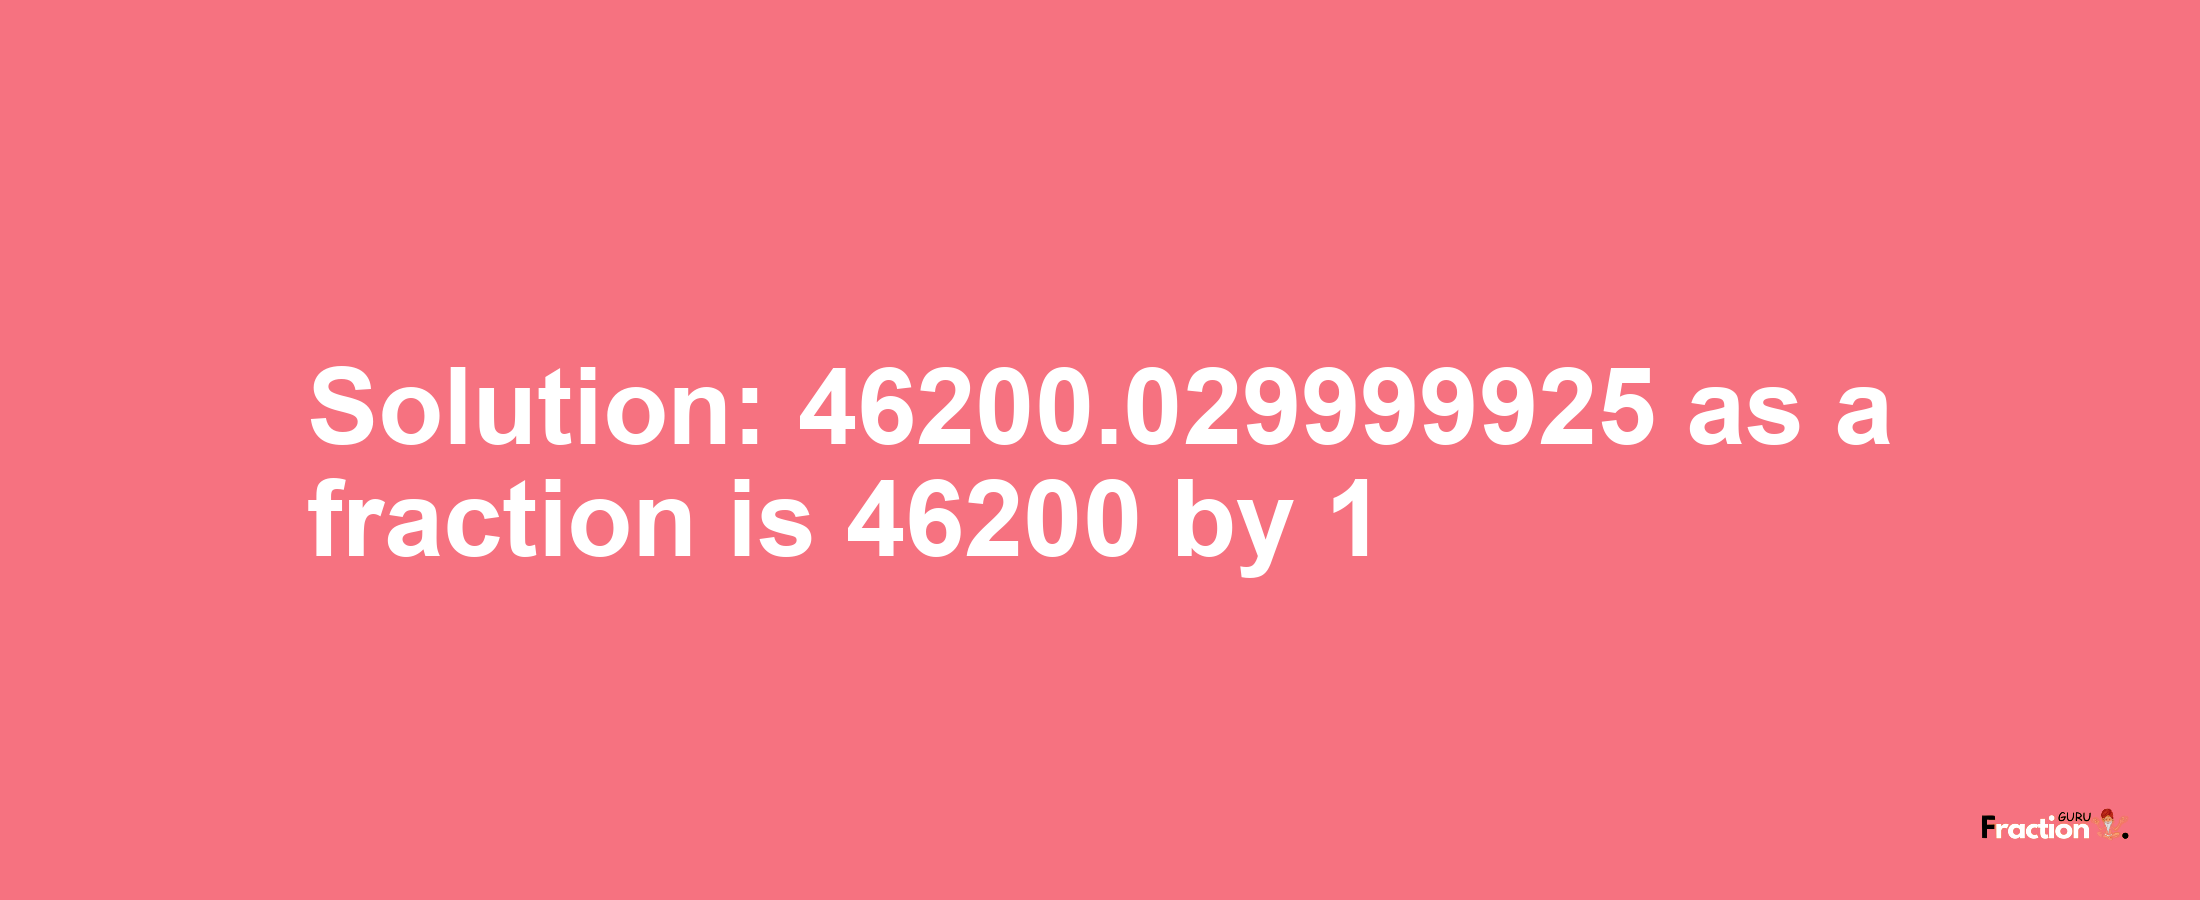 Solution:46200.029999925 as a fraction is 46200/1